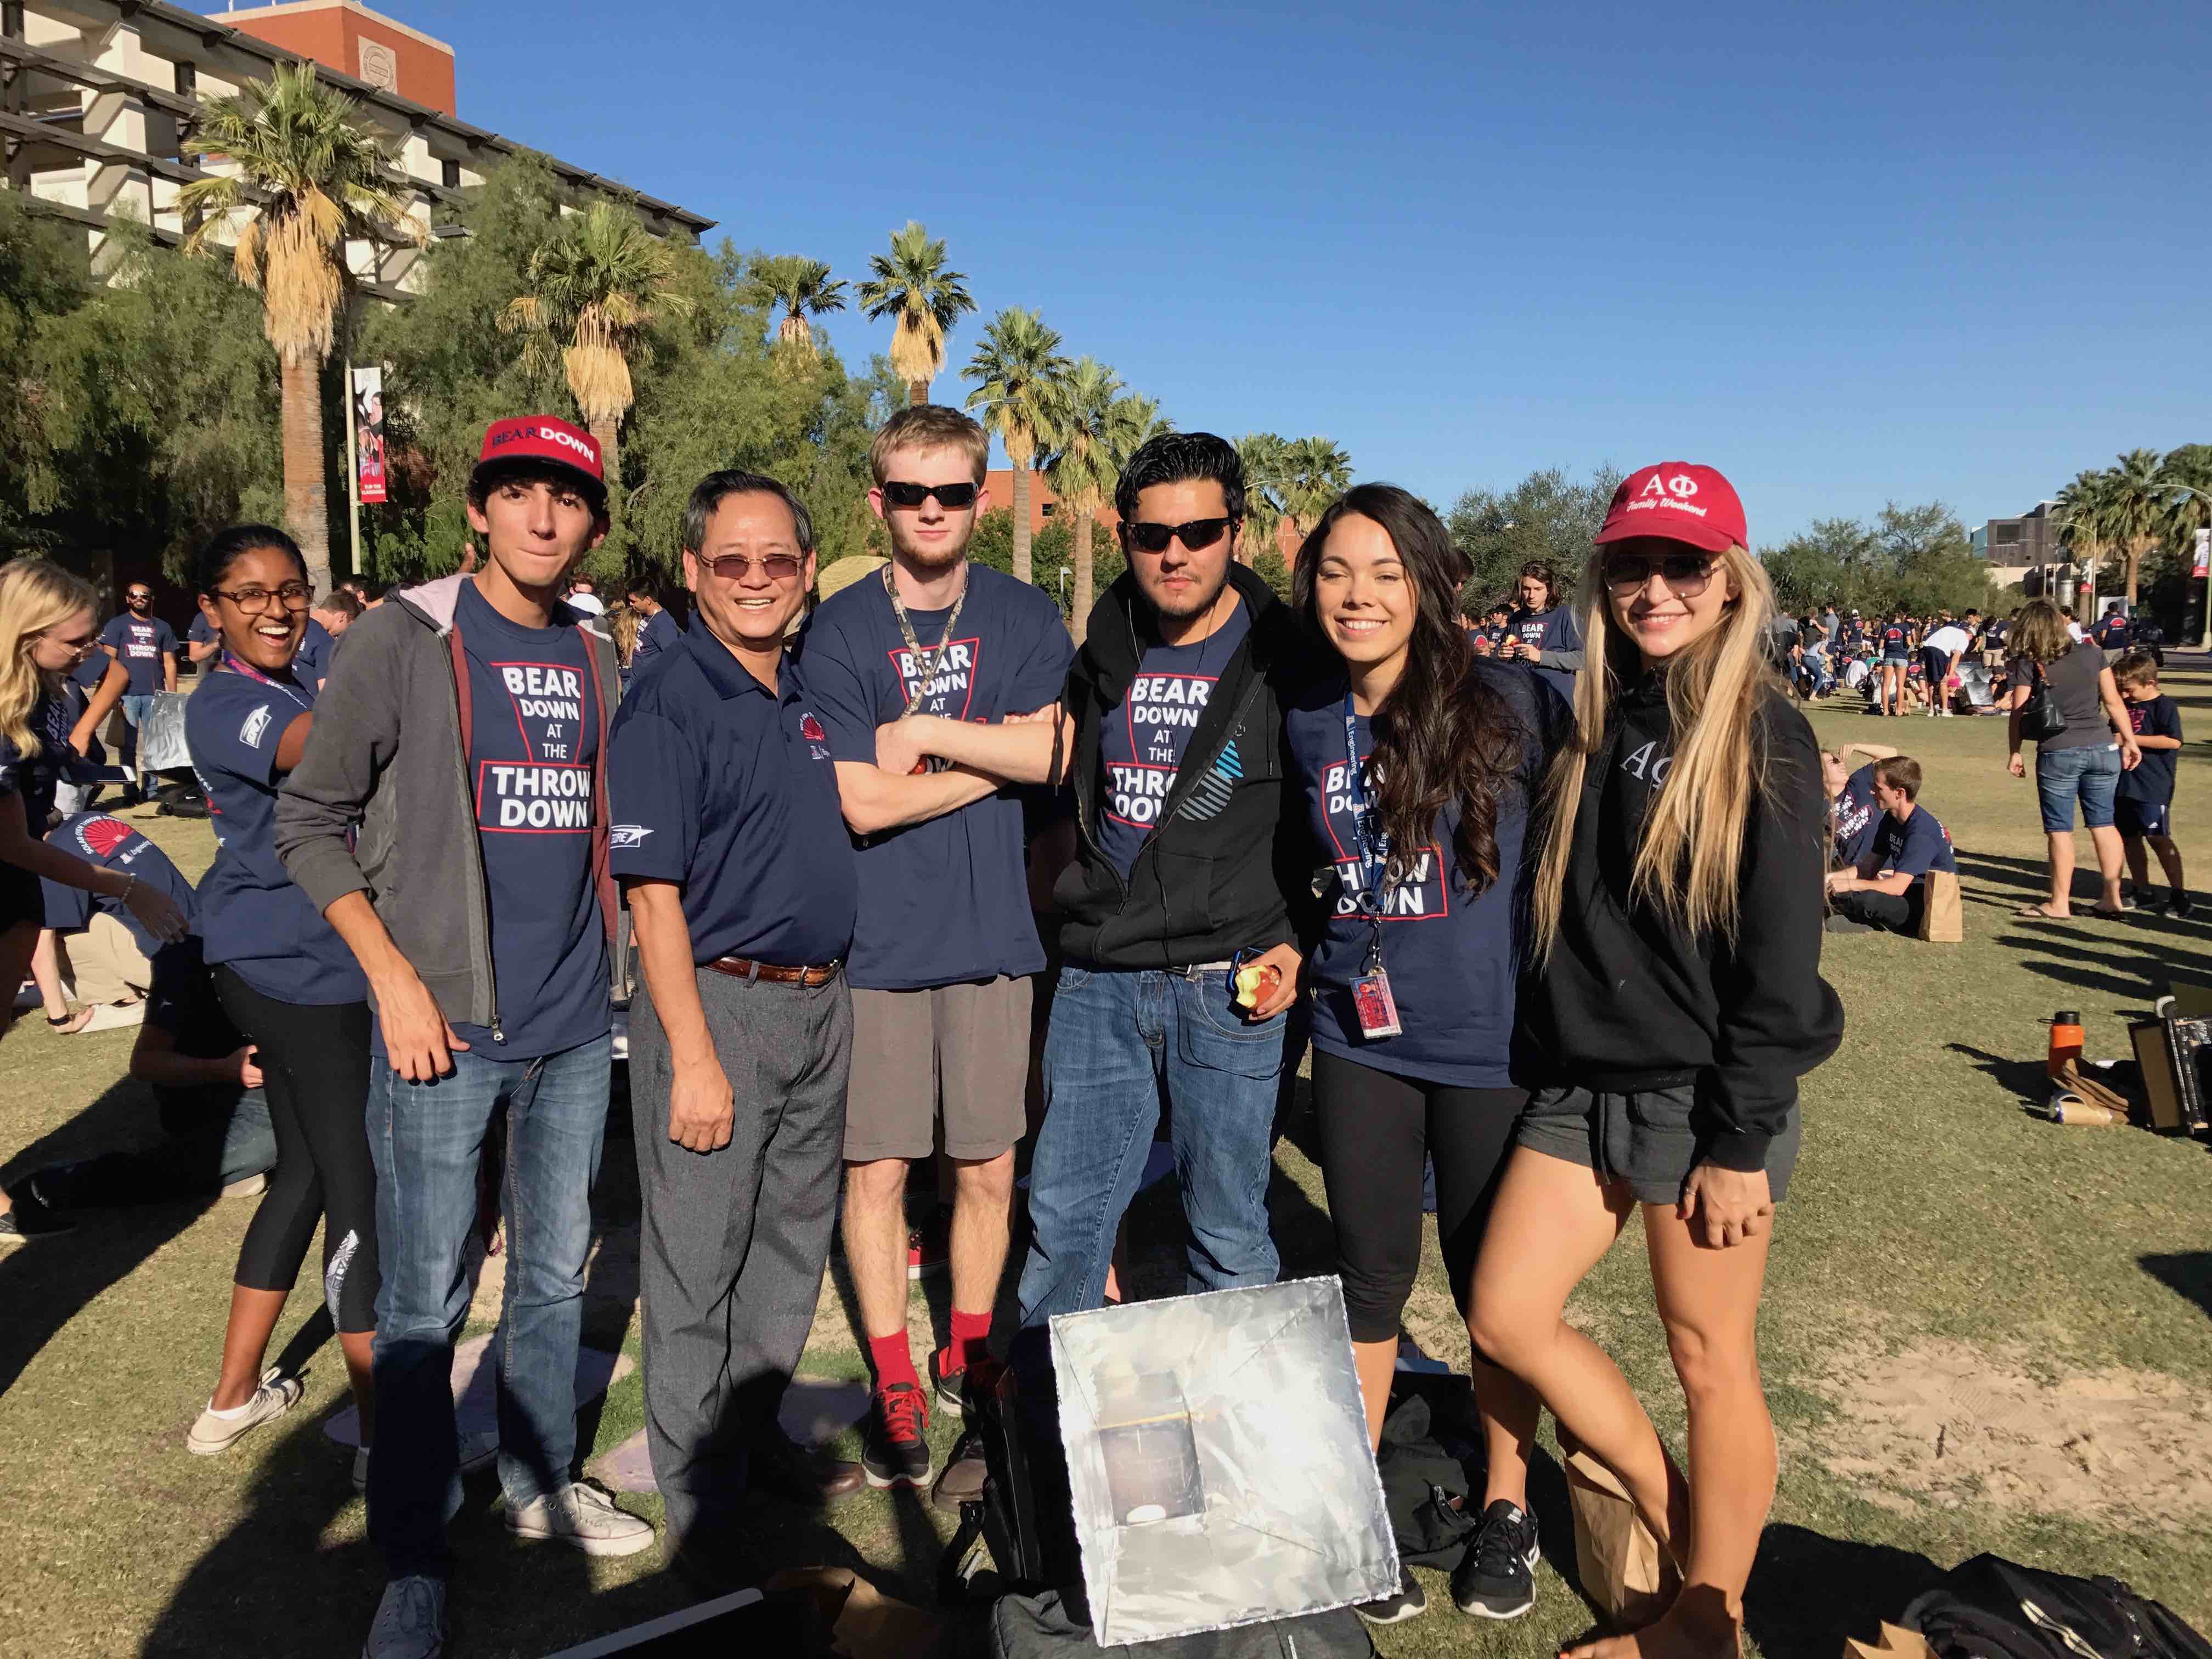 Solar Oven Throw Down event 2016